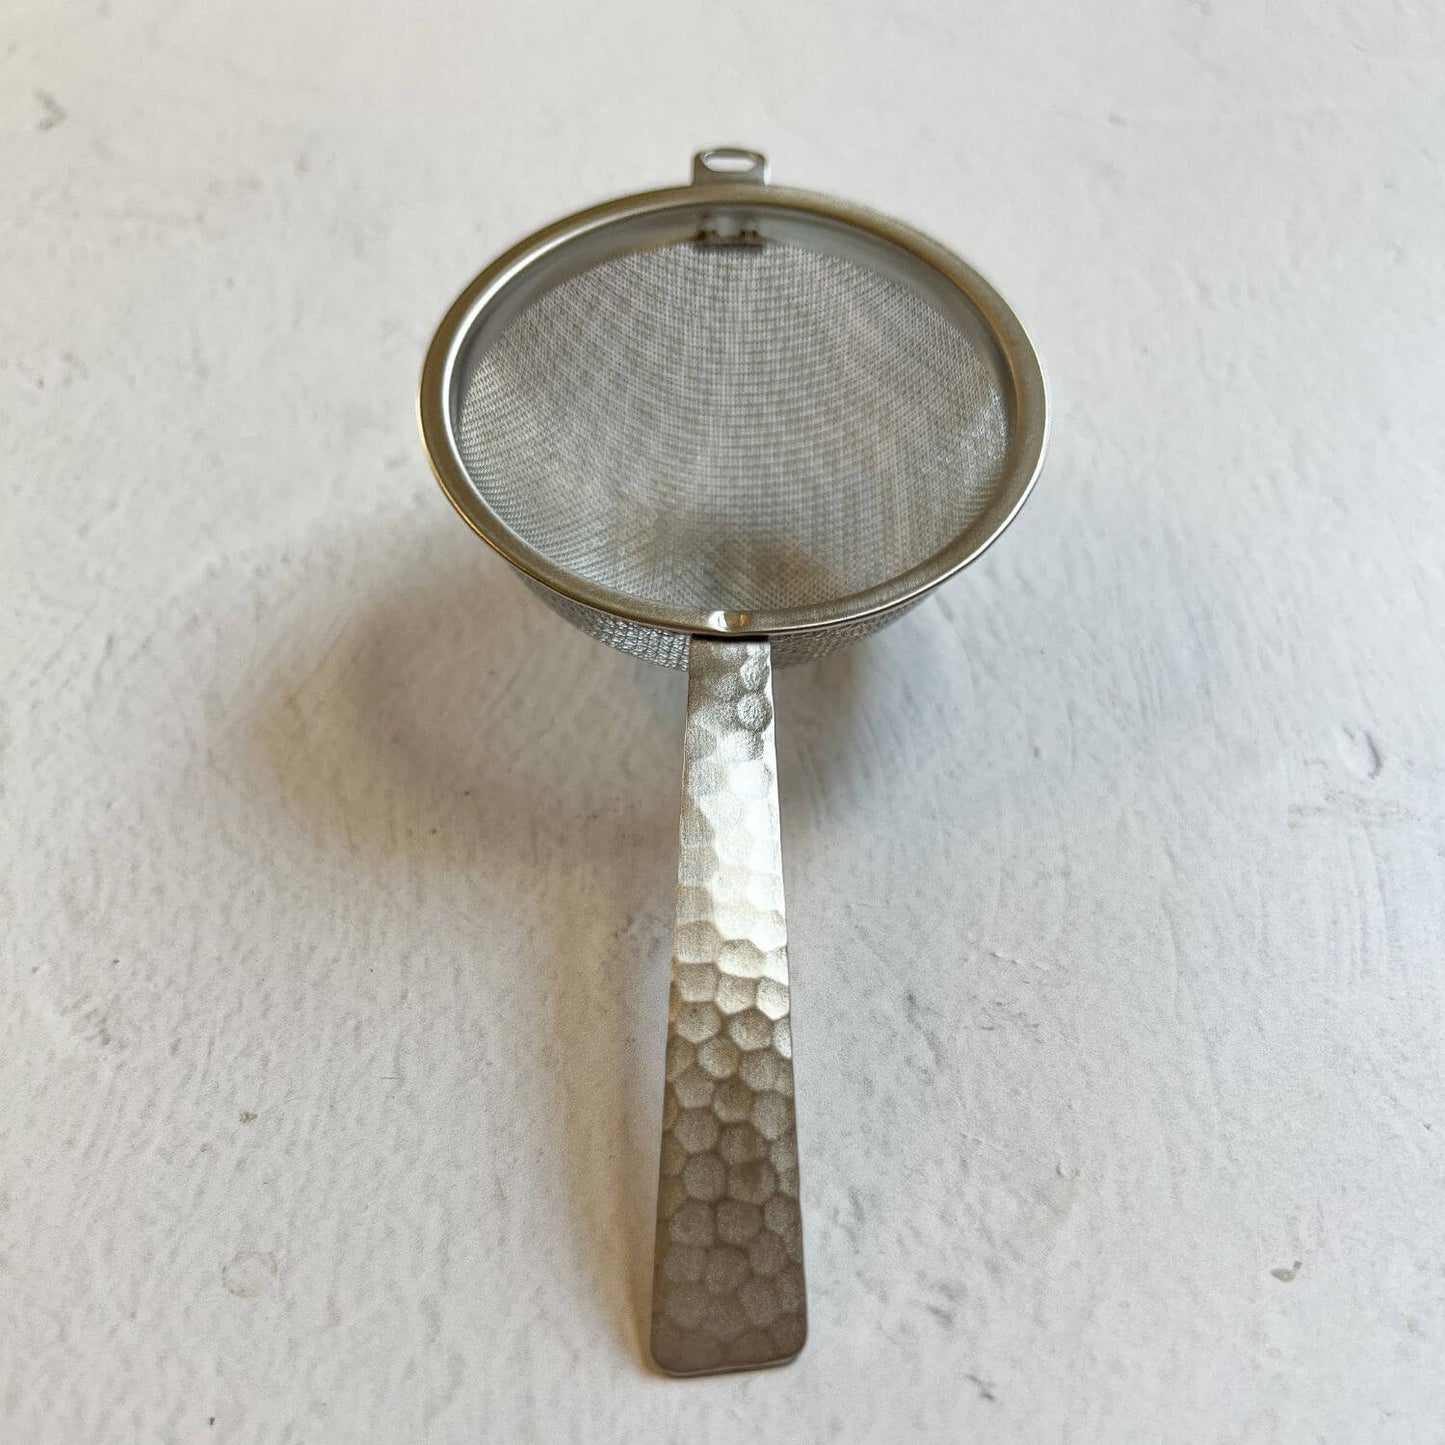 Stainless Steel Tea Strainer Made in Tsubame